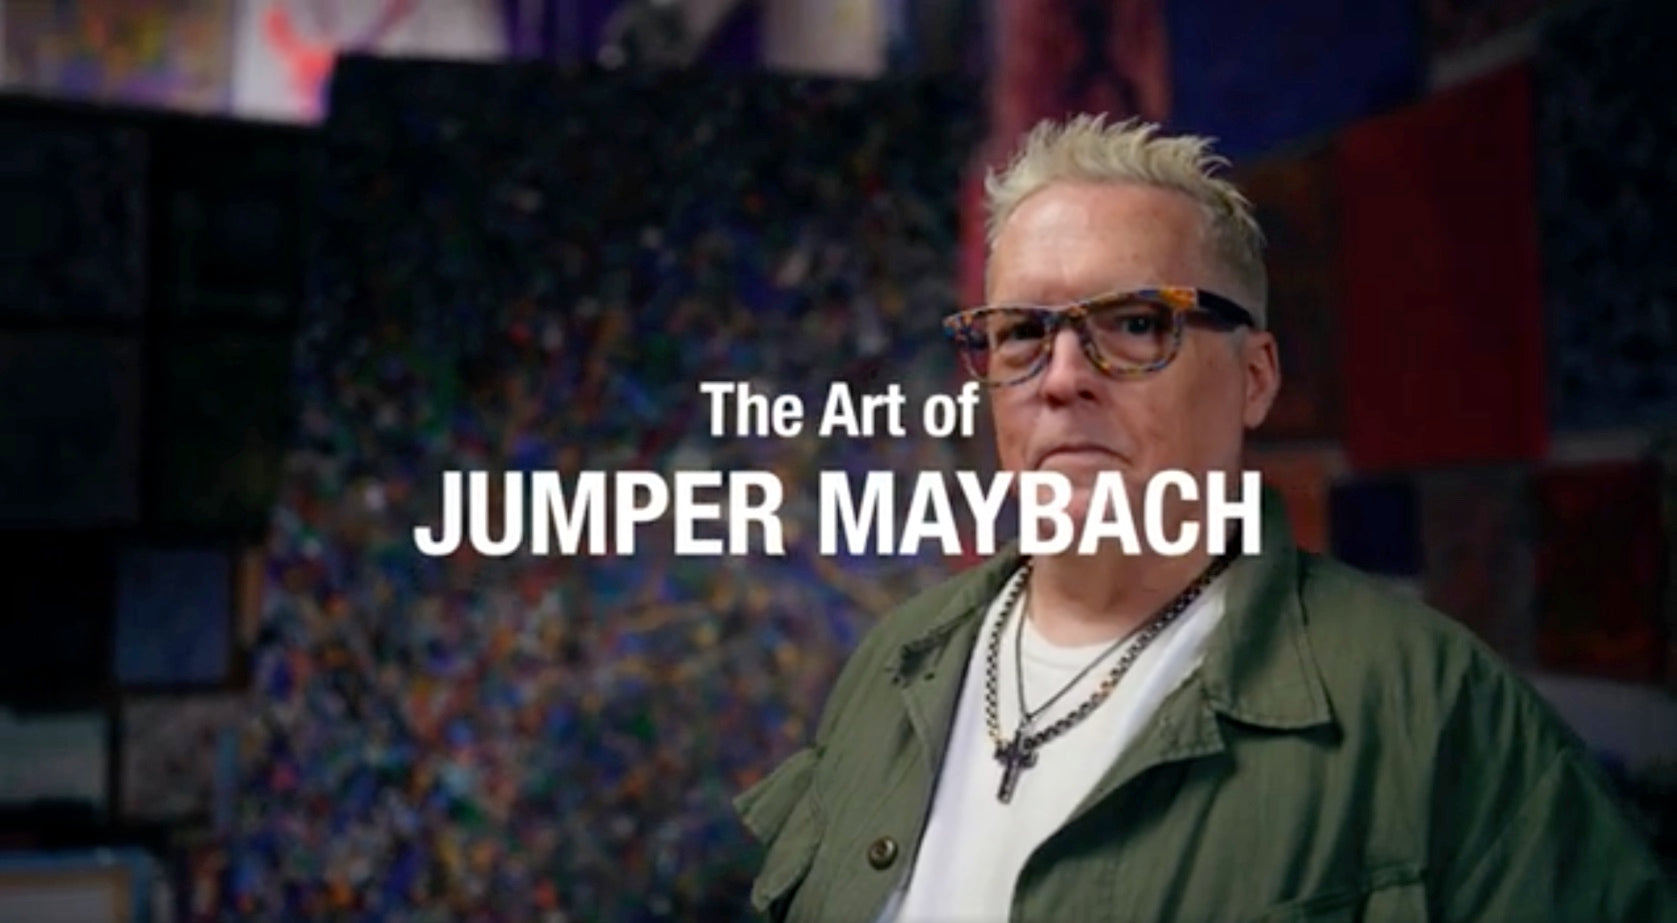 Load video: The Art of Jumper Maybach